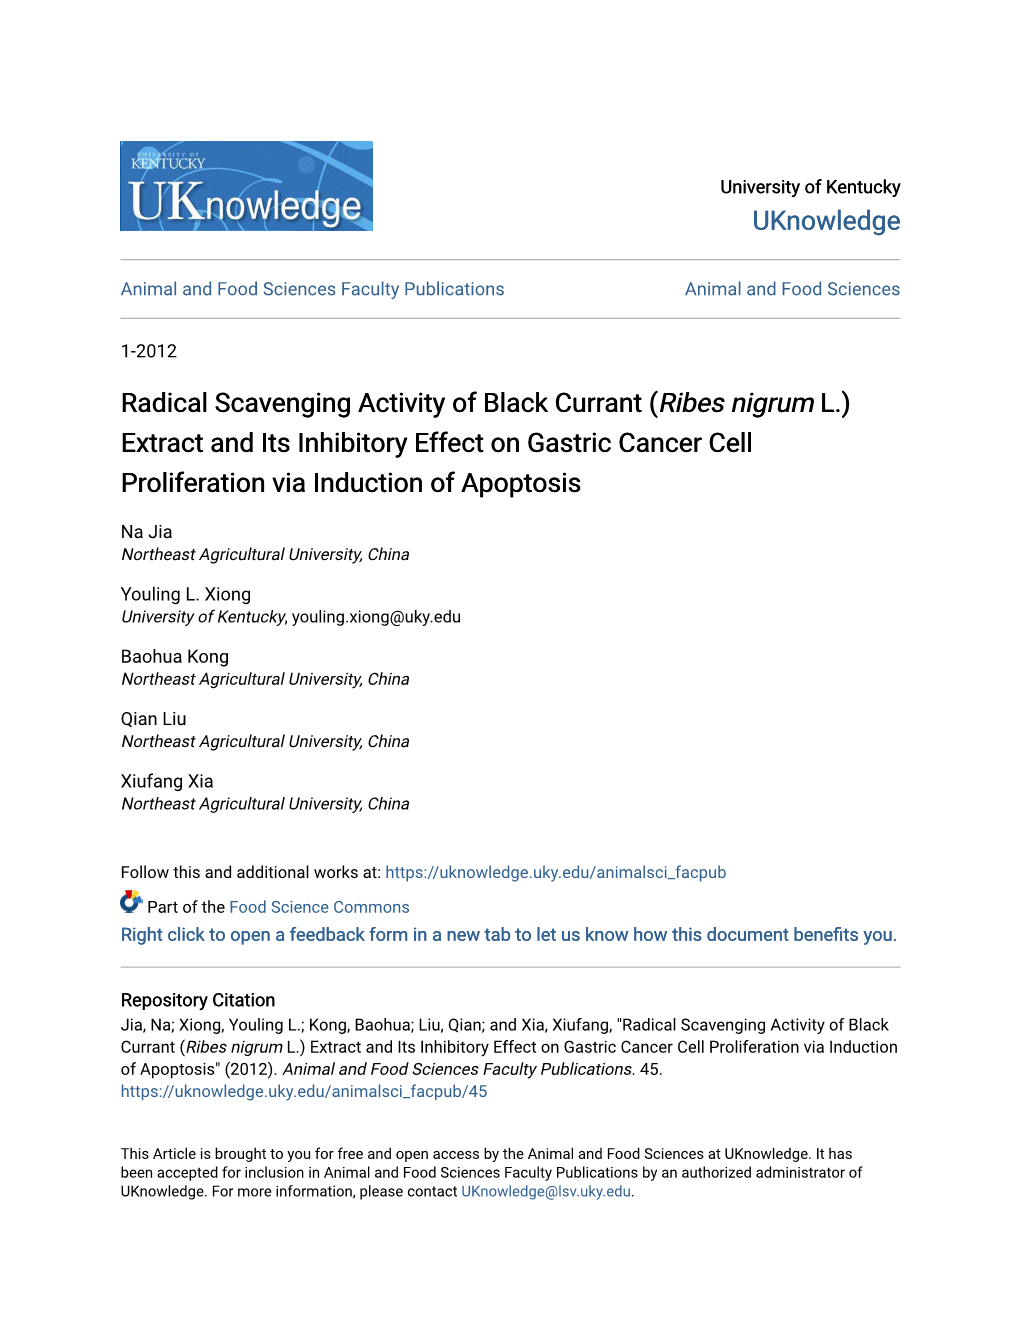 Radical Scavenging Activity of Black Currant (Ribes Nigrum L.) Extract and Its Inhibitory Effect on Gastric Cancer Cell Proliferation Via Induction of Apoptosis